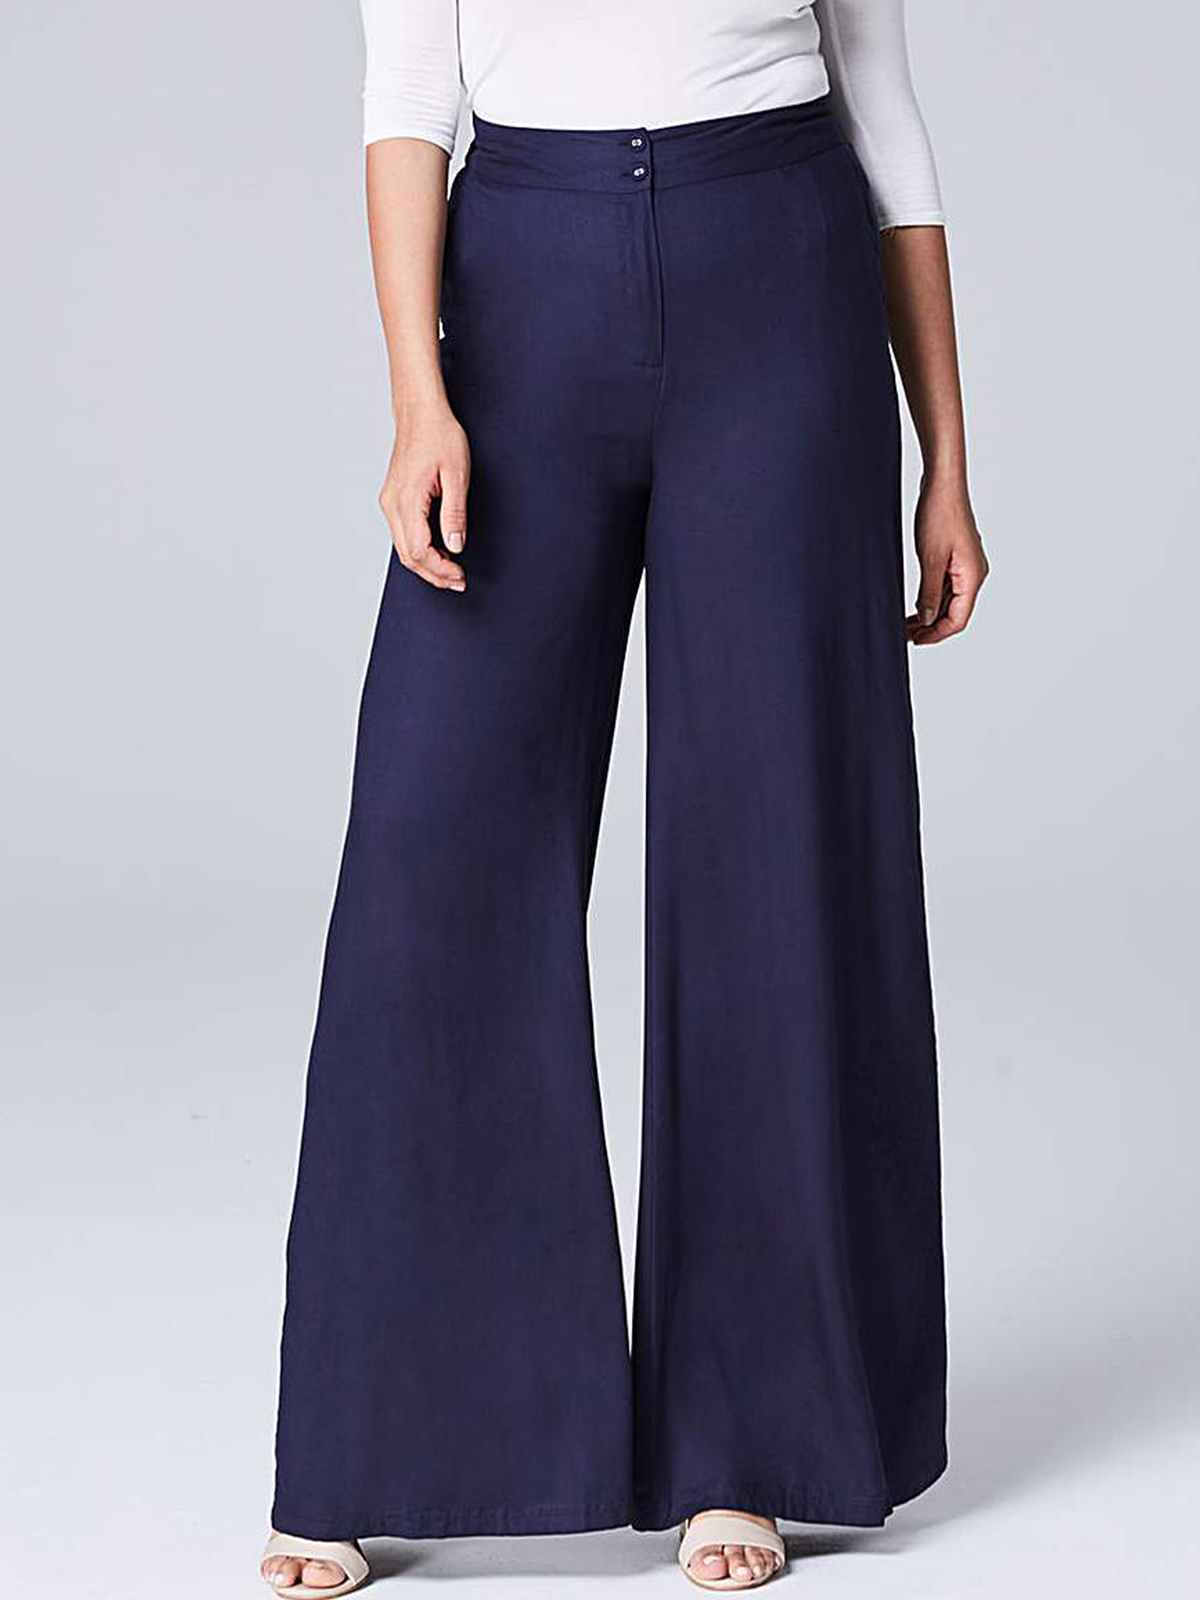 Capsule - - Capsule NAVY Super Wide Leg Trousers - Size 10 to 32 ...